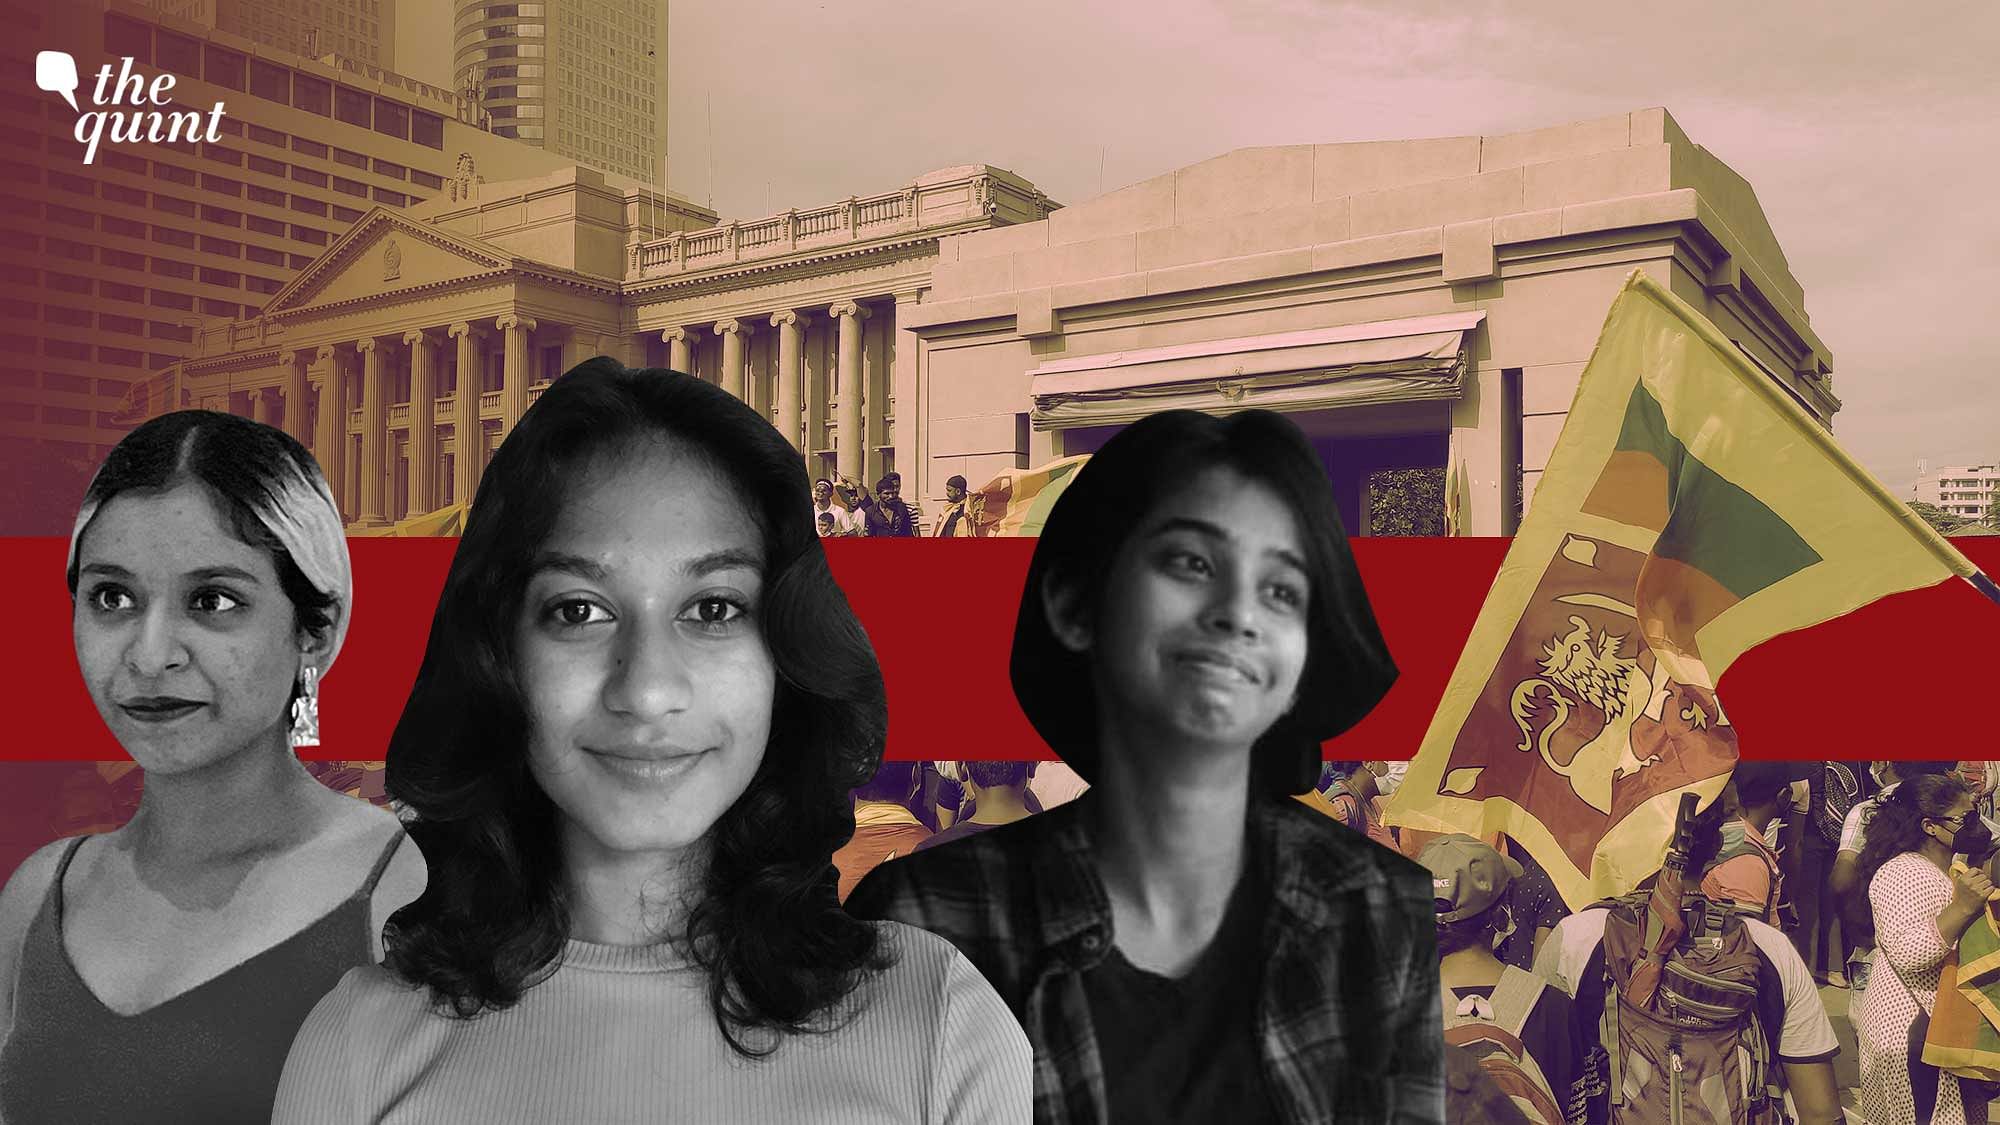 <div class="paragraphs"><p><strong>The Quint</strong> spoke to three youth activists to find out what they think about the ongoing situation in Sri Lanka.</p></div>